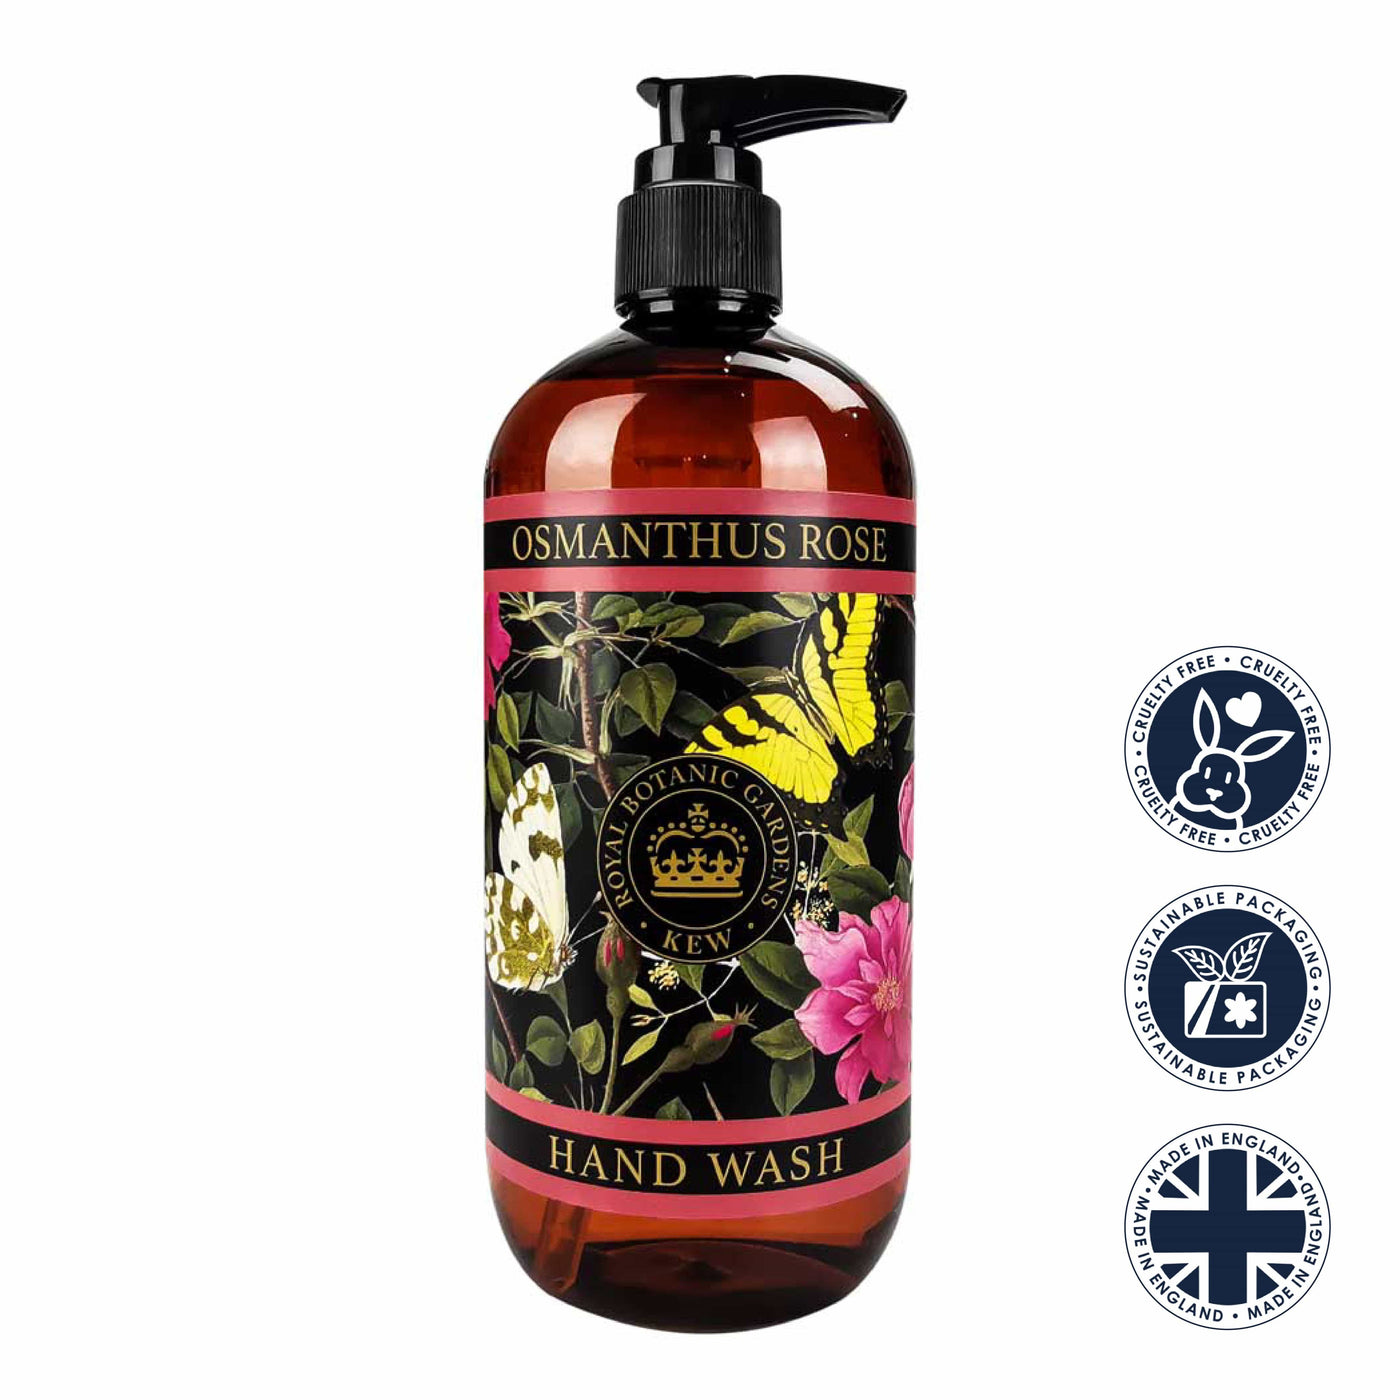 Osmanthus Rose Hand Wash - Kew Gardens Collection from our Liquid Hand & Body Soap collection by The English Soap Company